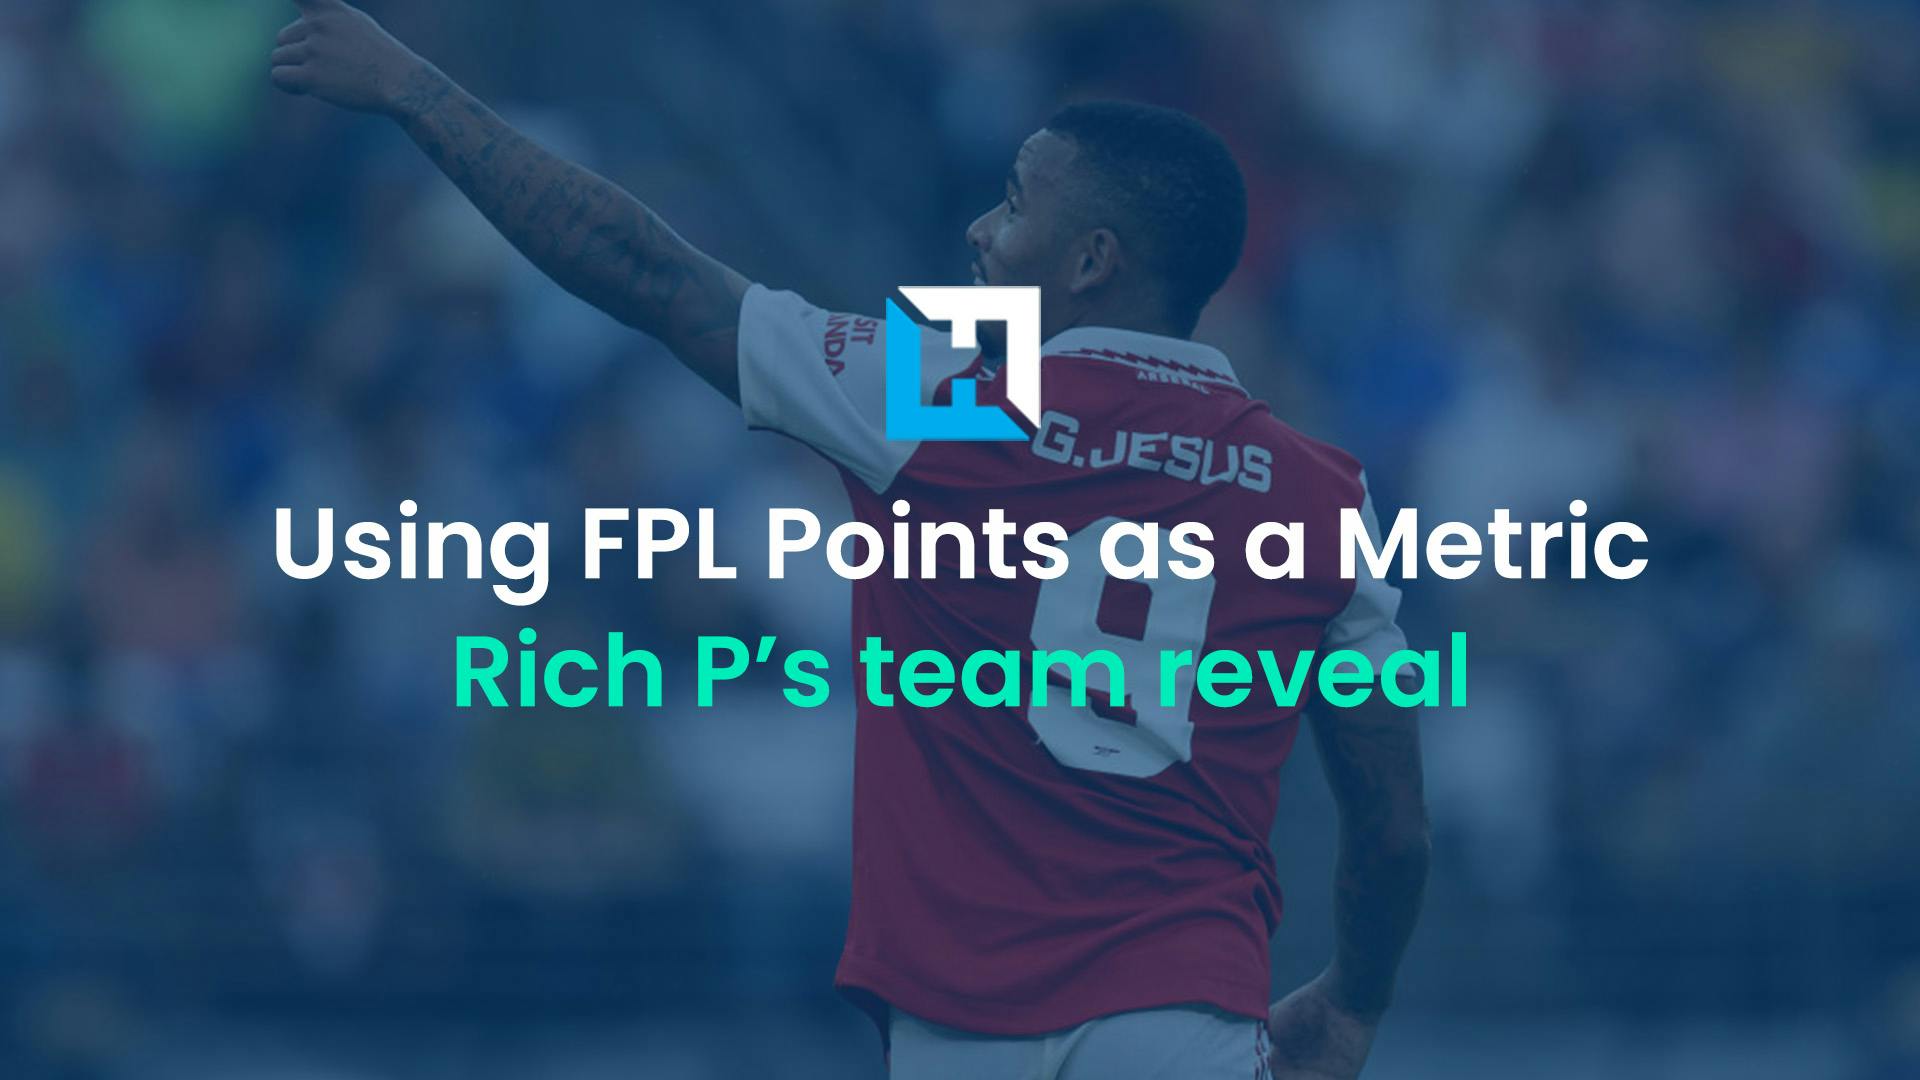 Using FPL Points as a Metric: Gameweek 6 team reveal 2022/23